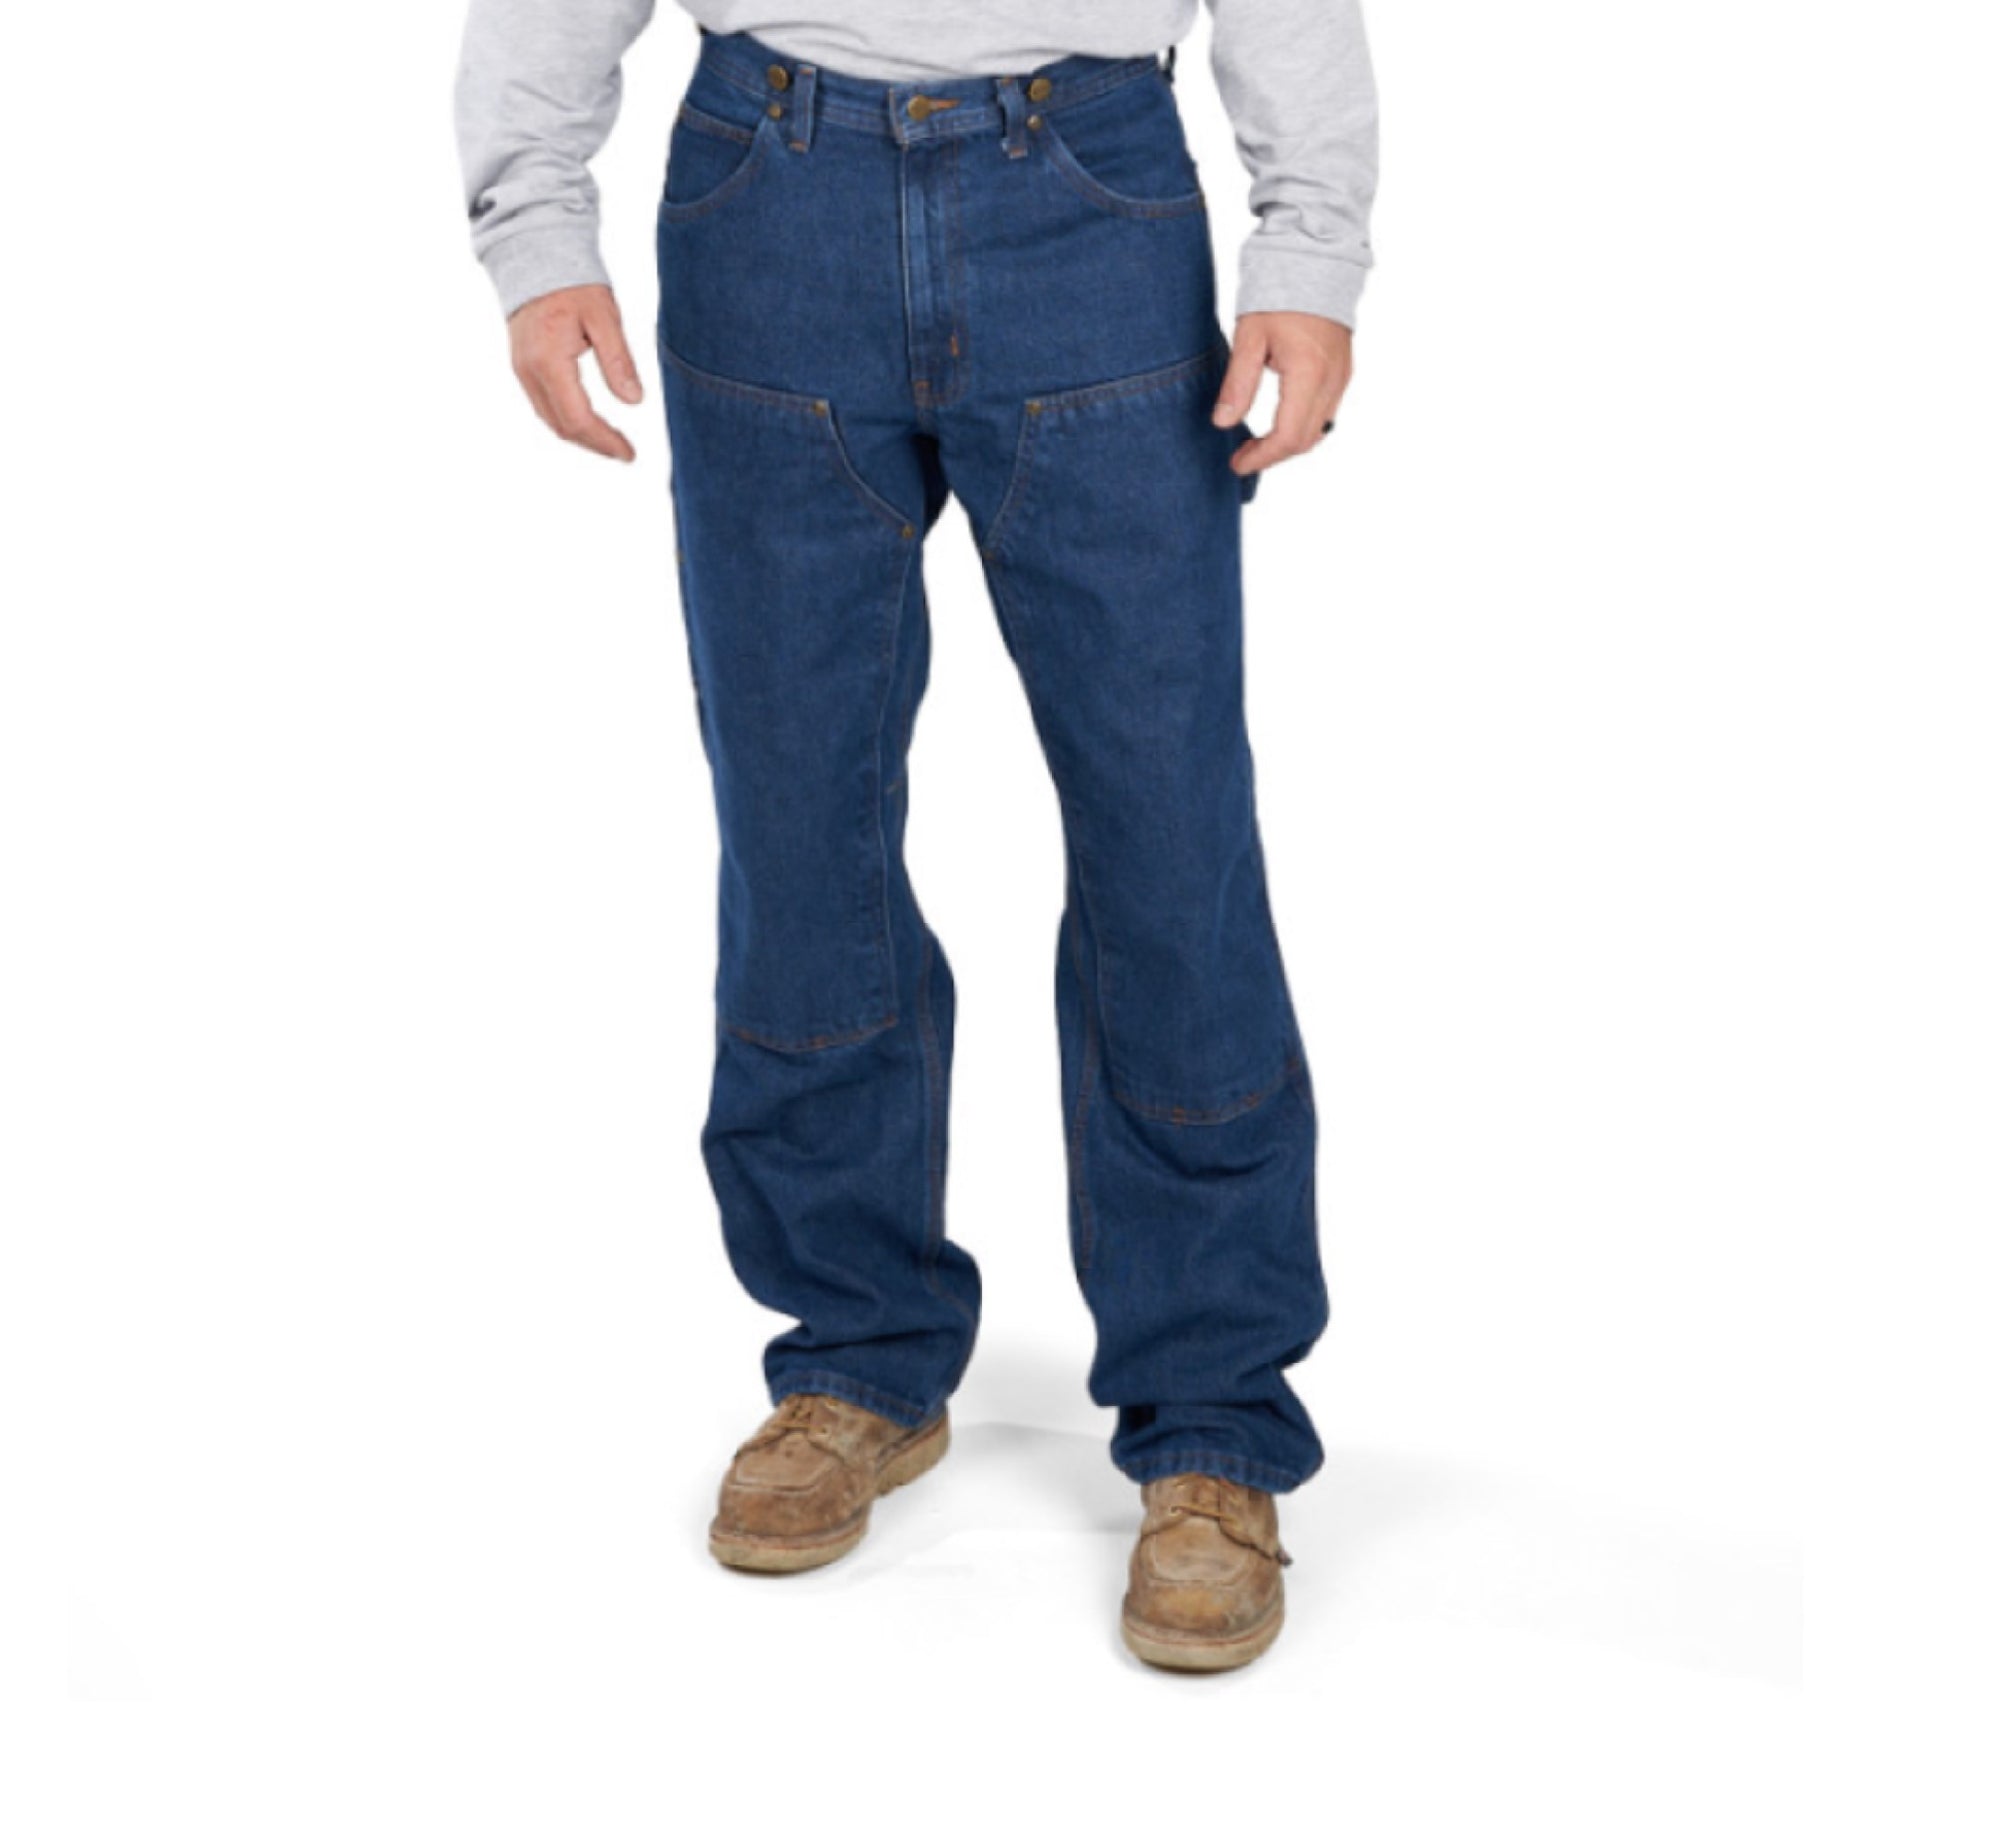 KEY Men's Double Front Logger Dungaree Jean - Work World - Workwear, Work Boots, Safety Gear